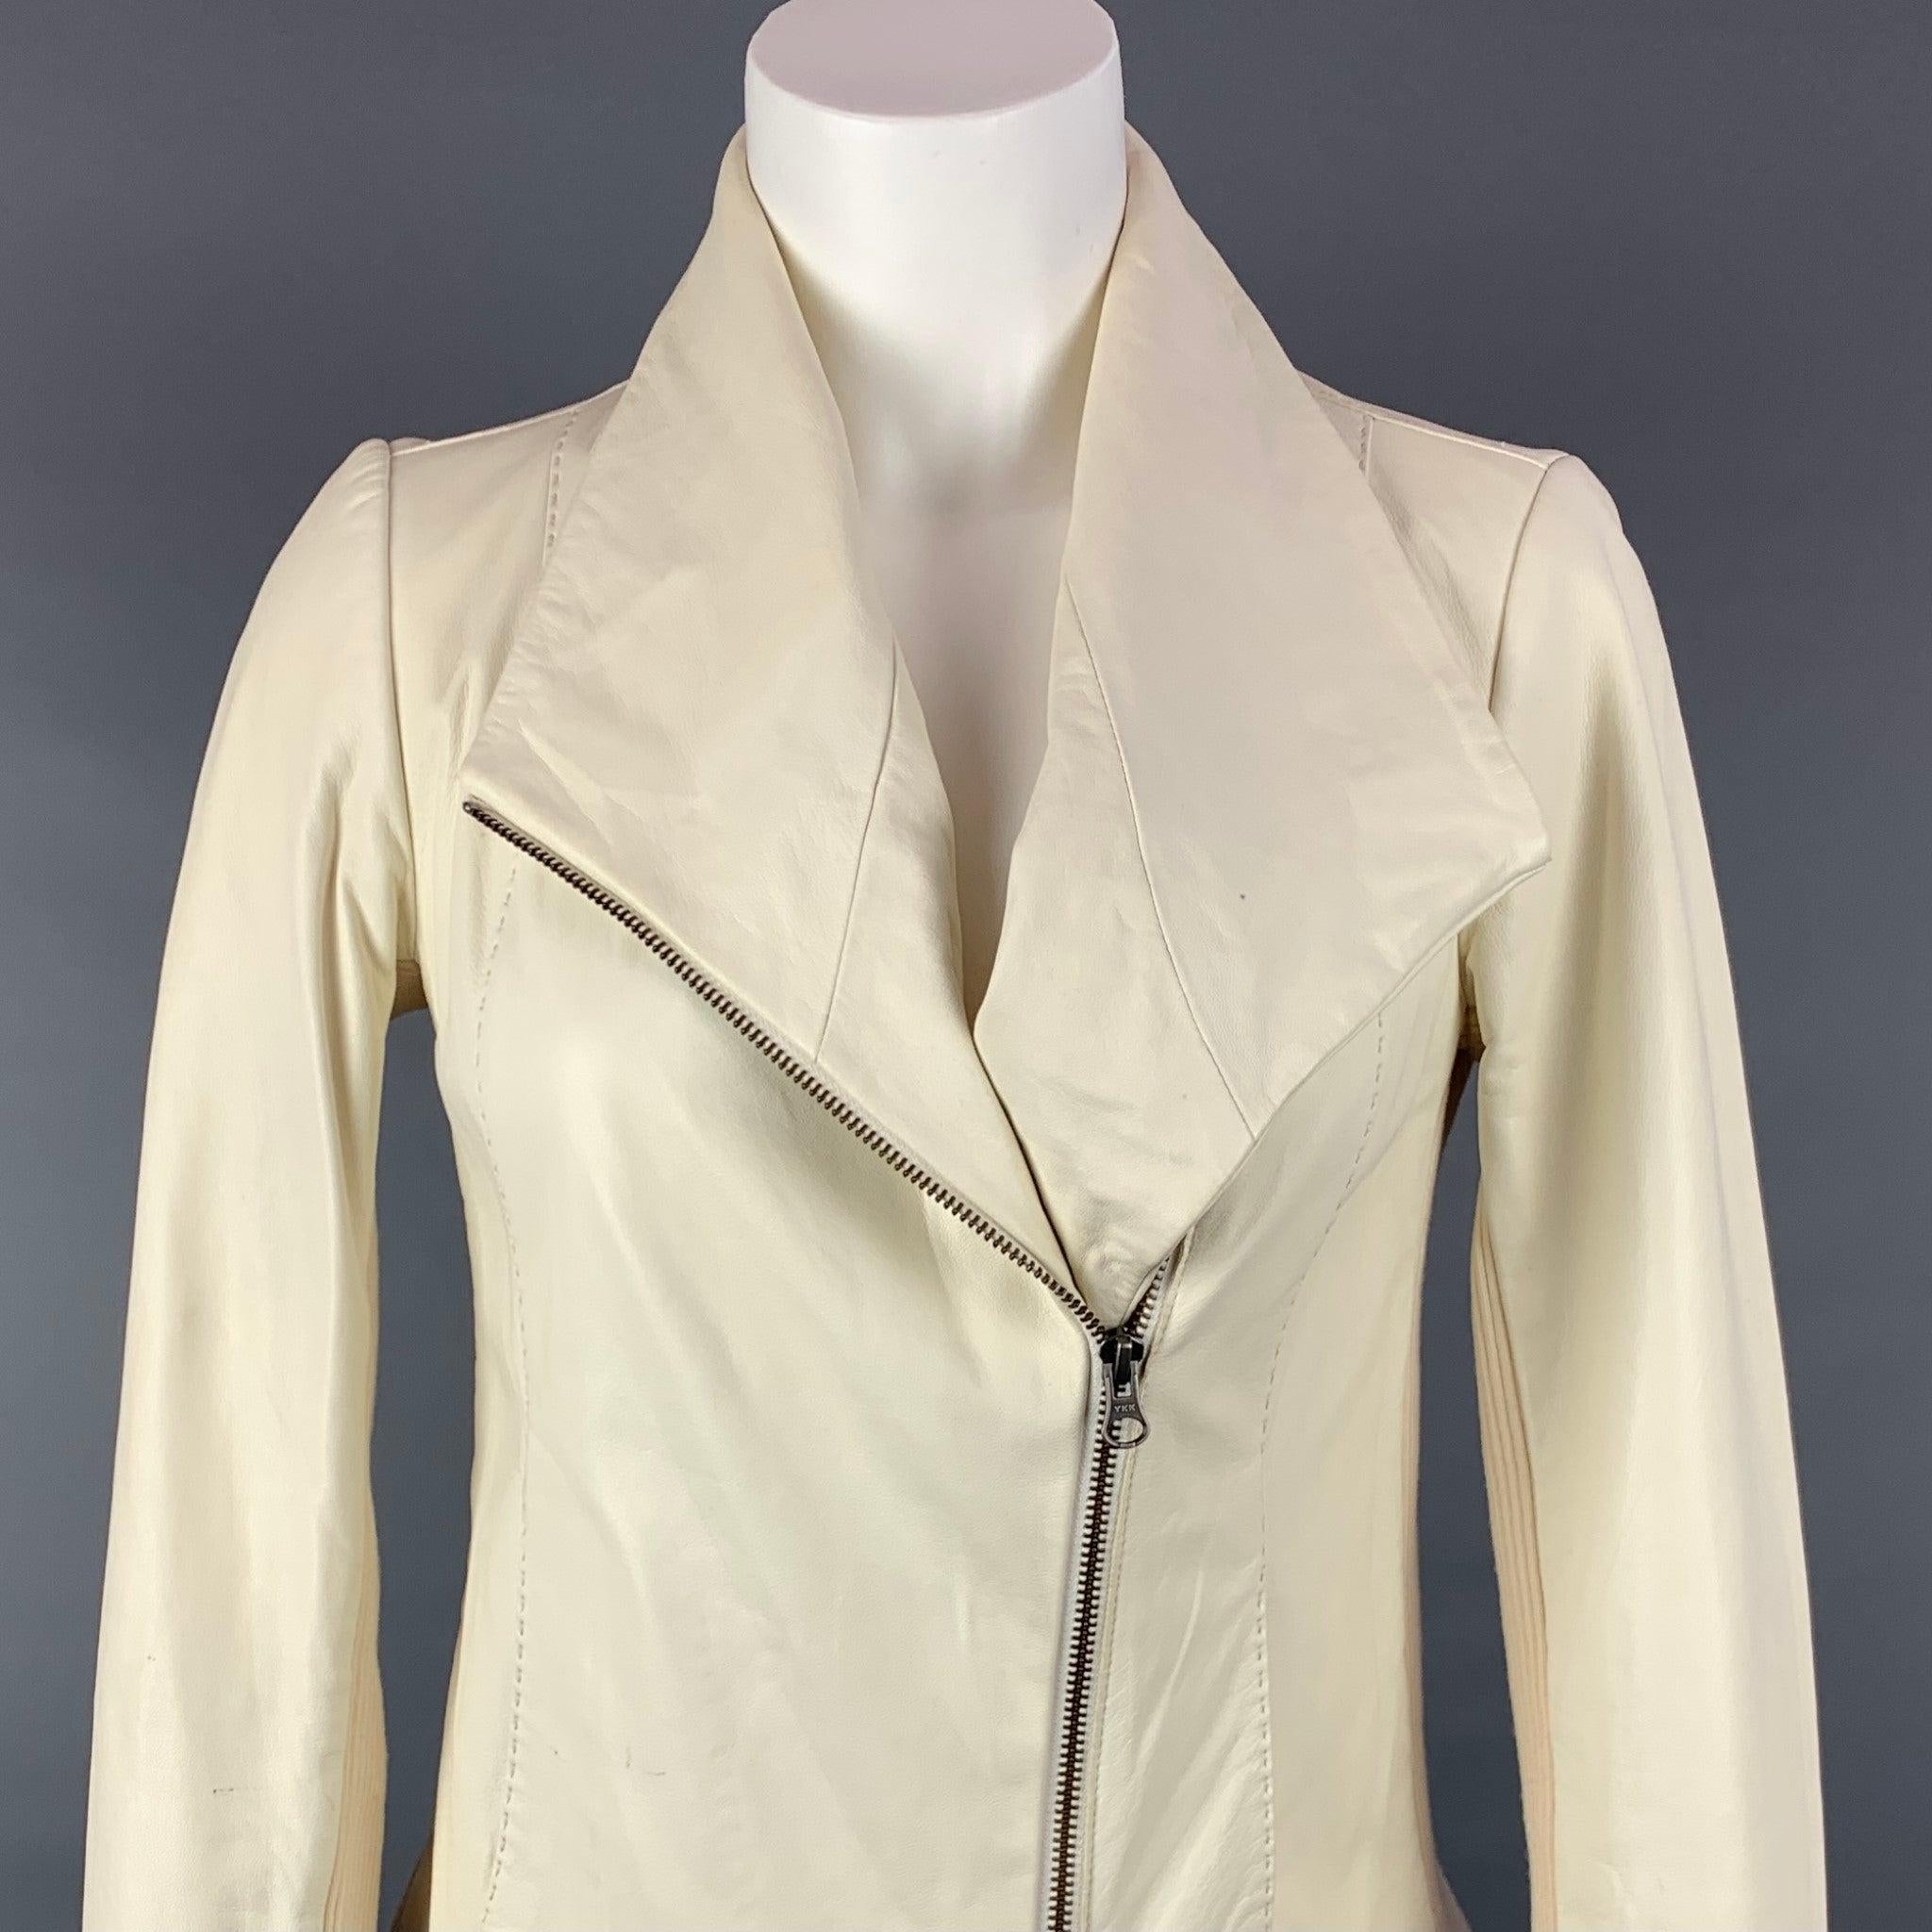 VINCE jacket comes in a cream leather with a stretch cotton panel featuring a motorcycle style, top stitching, slit pockets, and a zip up closure.
Very Good
Pre-Owned Condition. 

Marked:   XS 

Measurements: 
 
Shoulder: 14.5 inches  Bust: 32